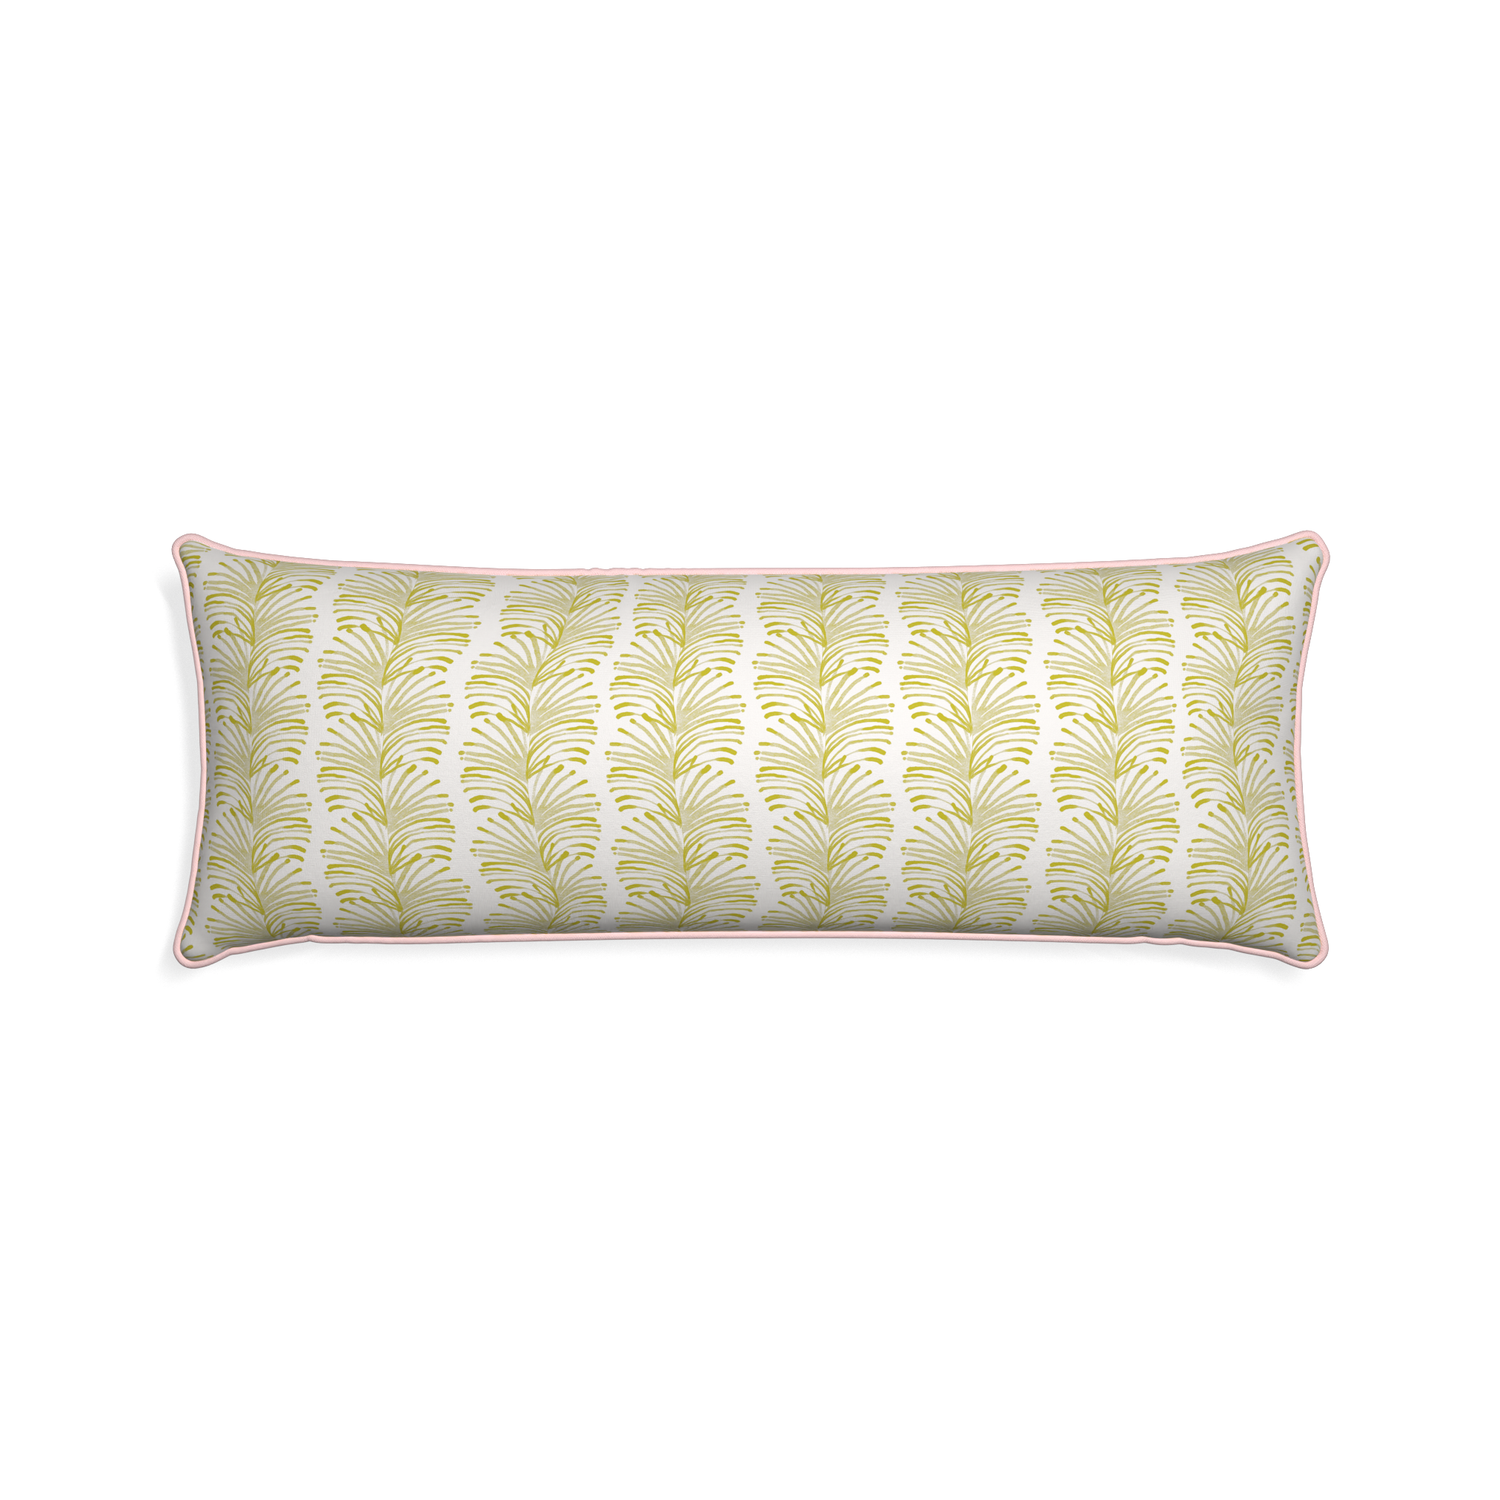 Xl-lumbar emma chartreuse custom pillow with petal piping on white background